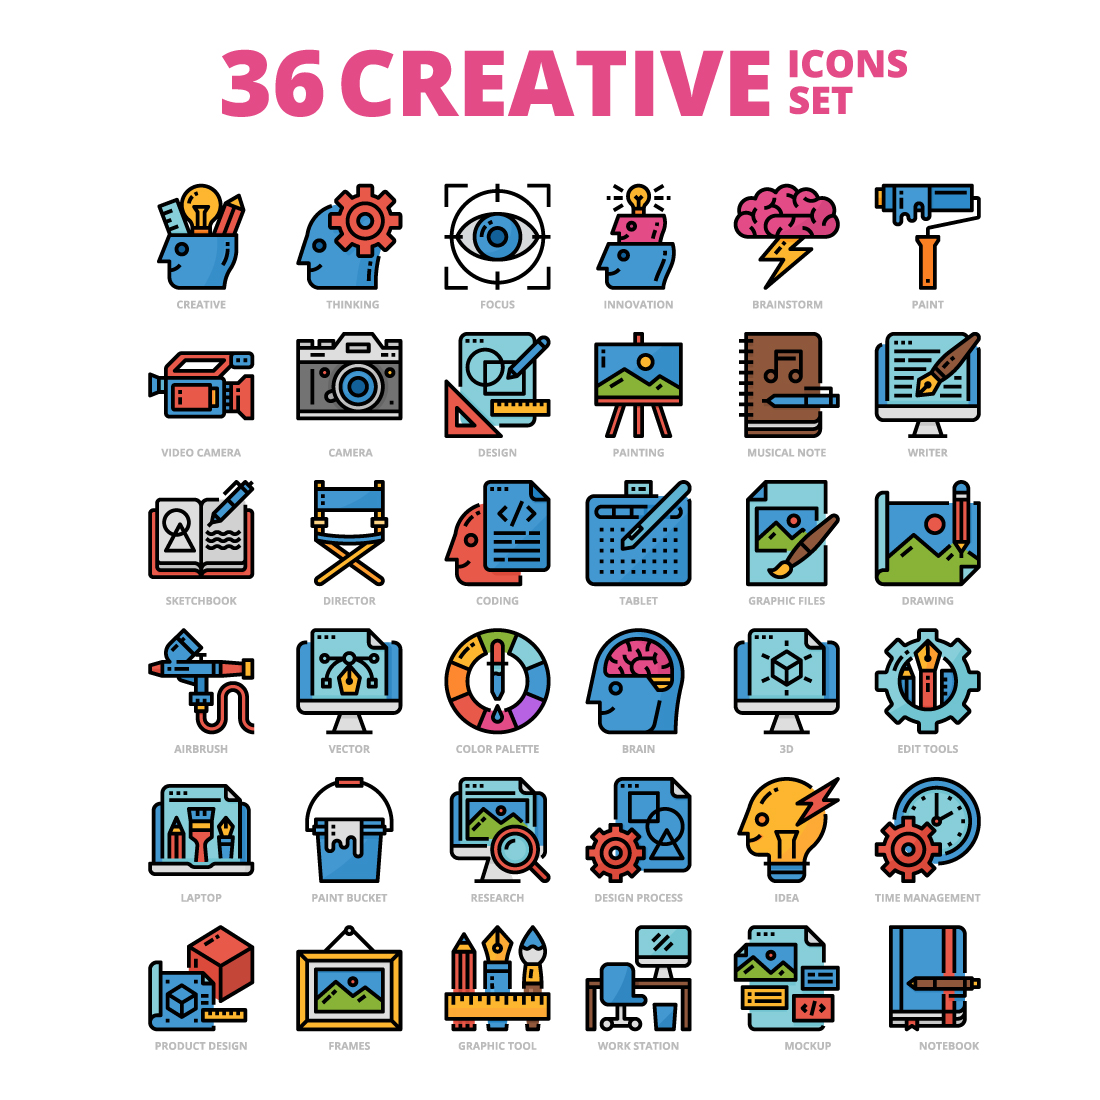 36 Creative Icons Set x 4 Styles cover image.